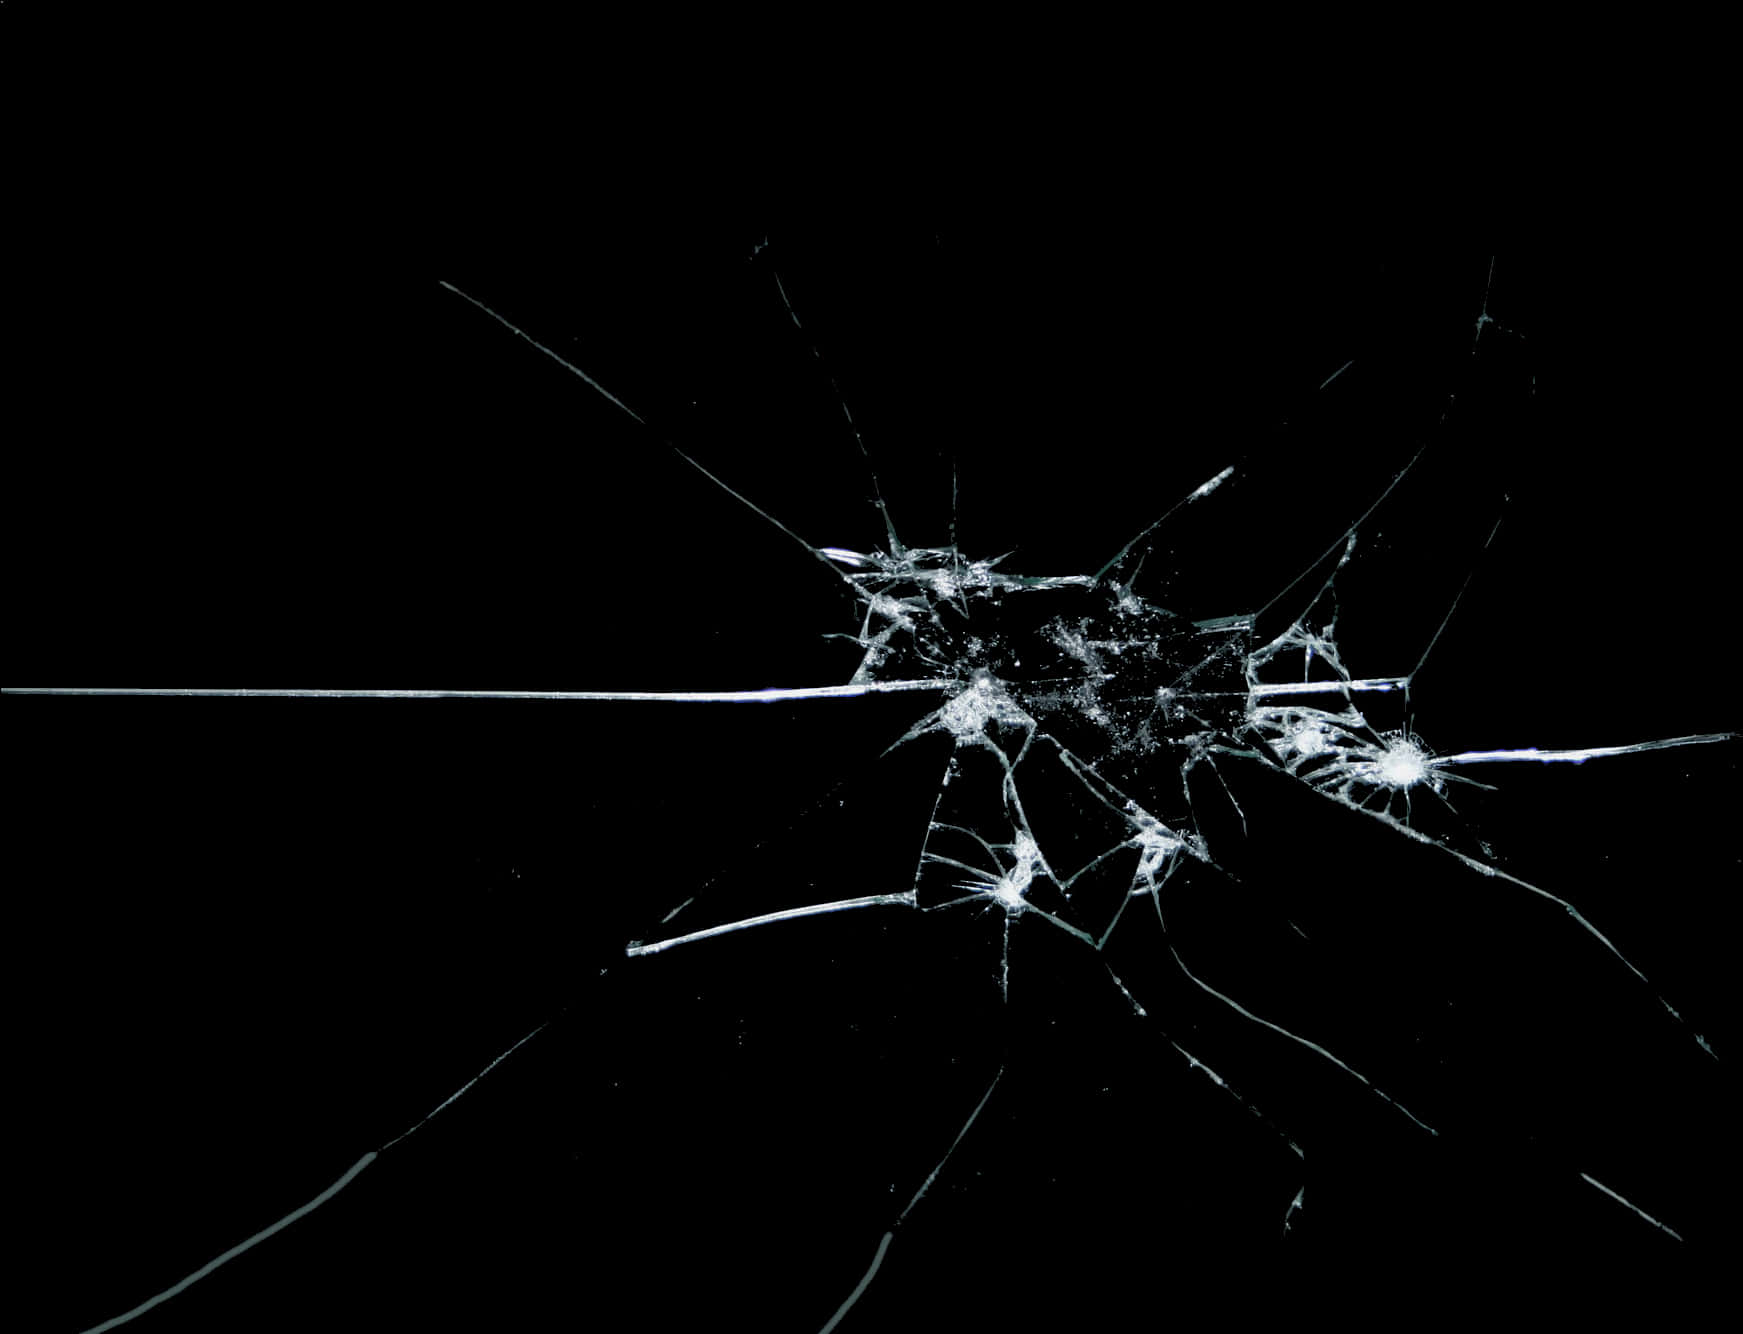 A Broken Glass With Many Cracks